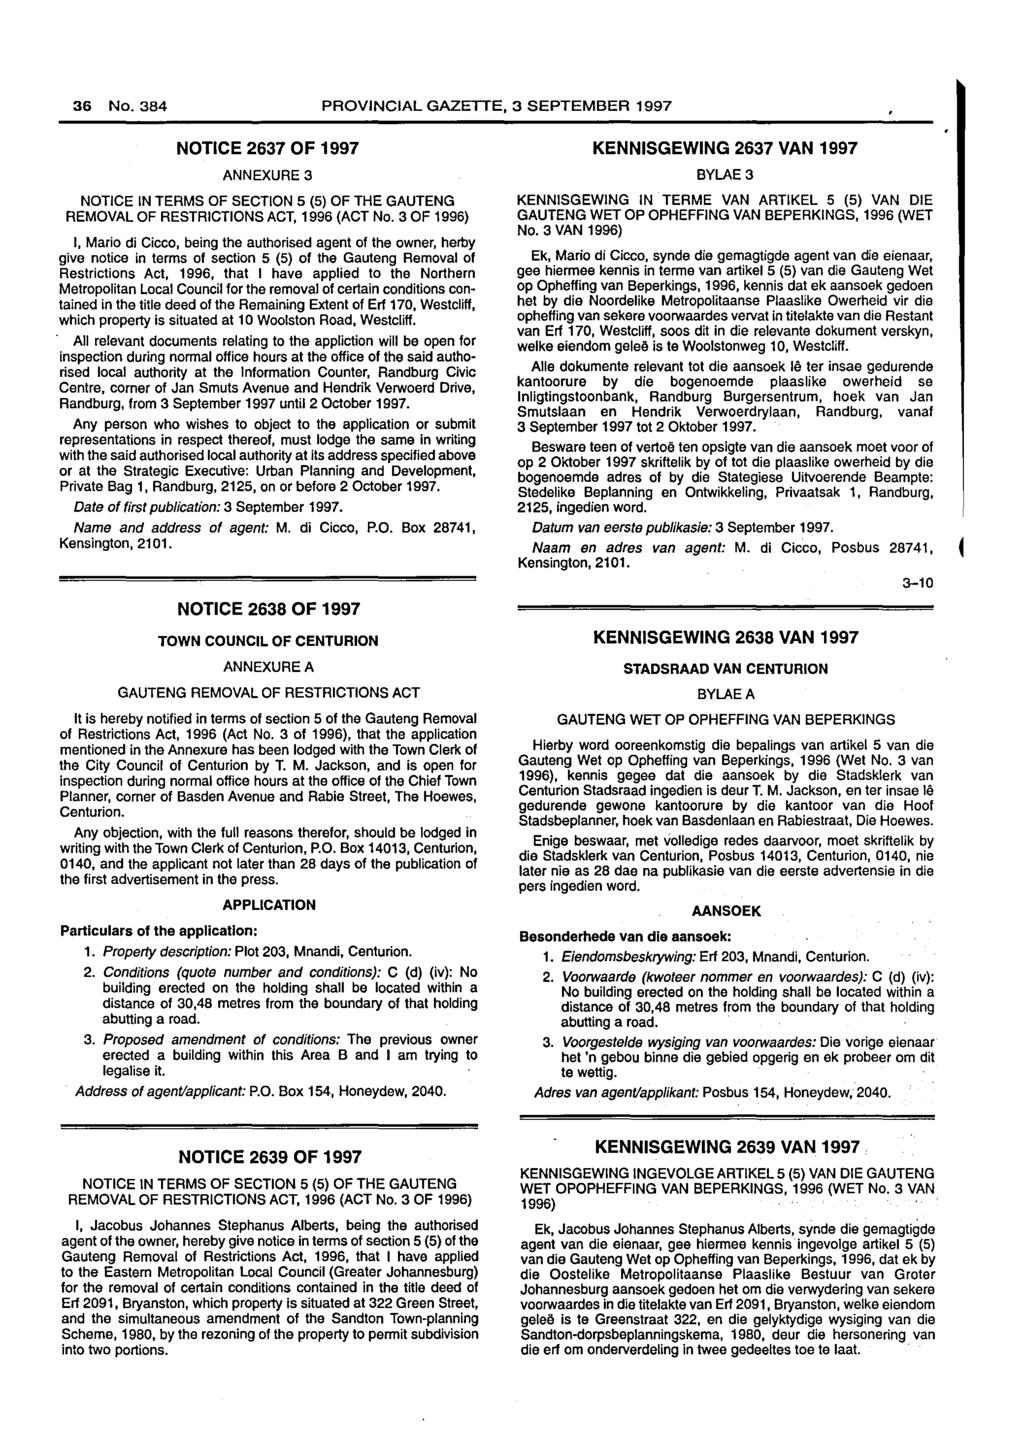 36 No. PROVINCIAL GAZEllE, 3 SEPTEMBER 1997 NOTICE 2637 OF 1997 ANNEXURE 3 NOTICE IN TERMS OF SECTION 5 (5) OF THE GAUTENG REMOVAL OF RESTRICTIONS ACT, 1996 (ACT No.